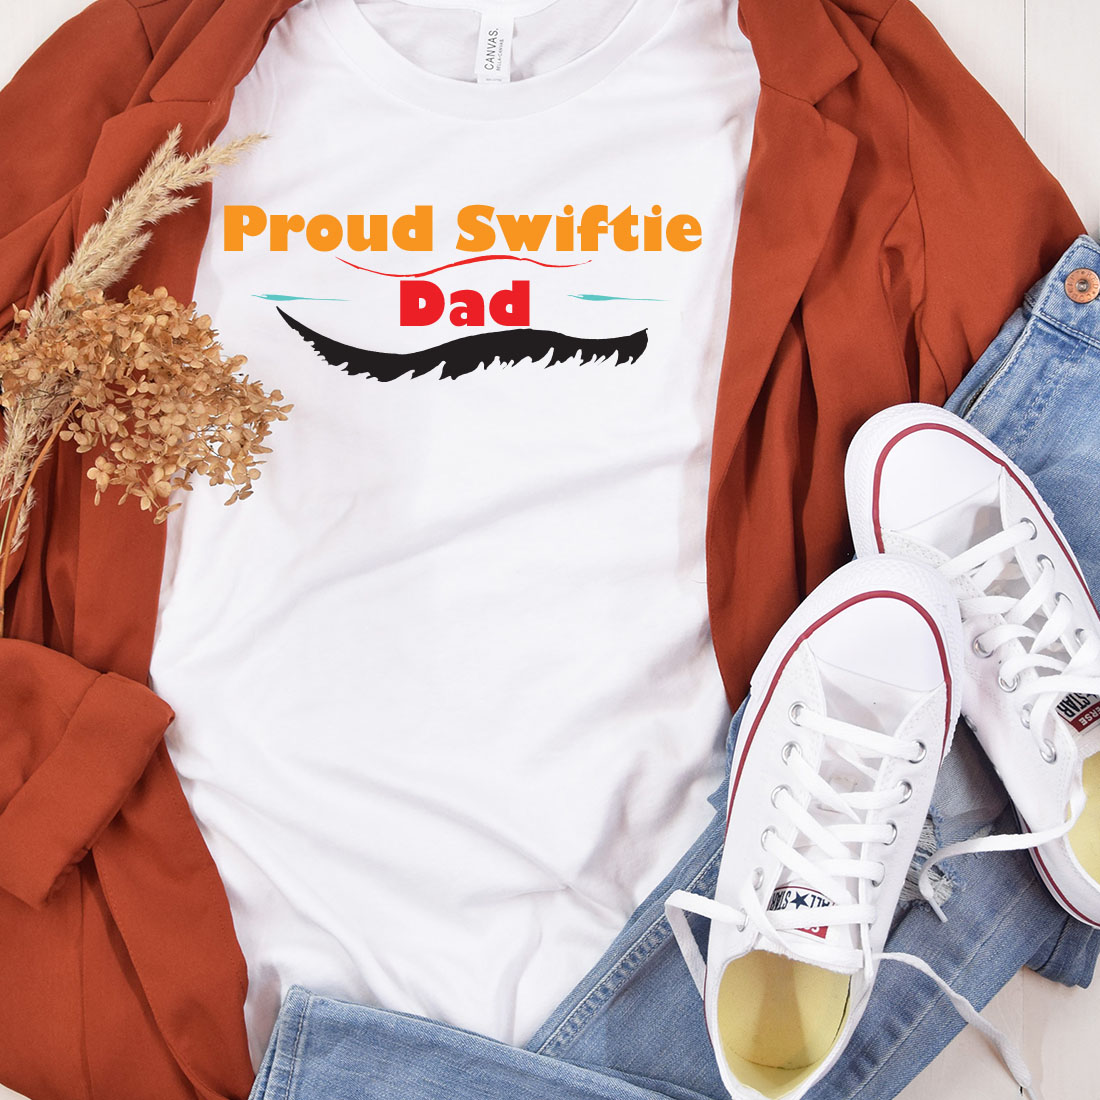 Proud Swiftie Dad preview image.